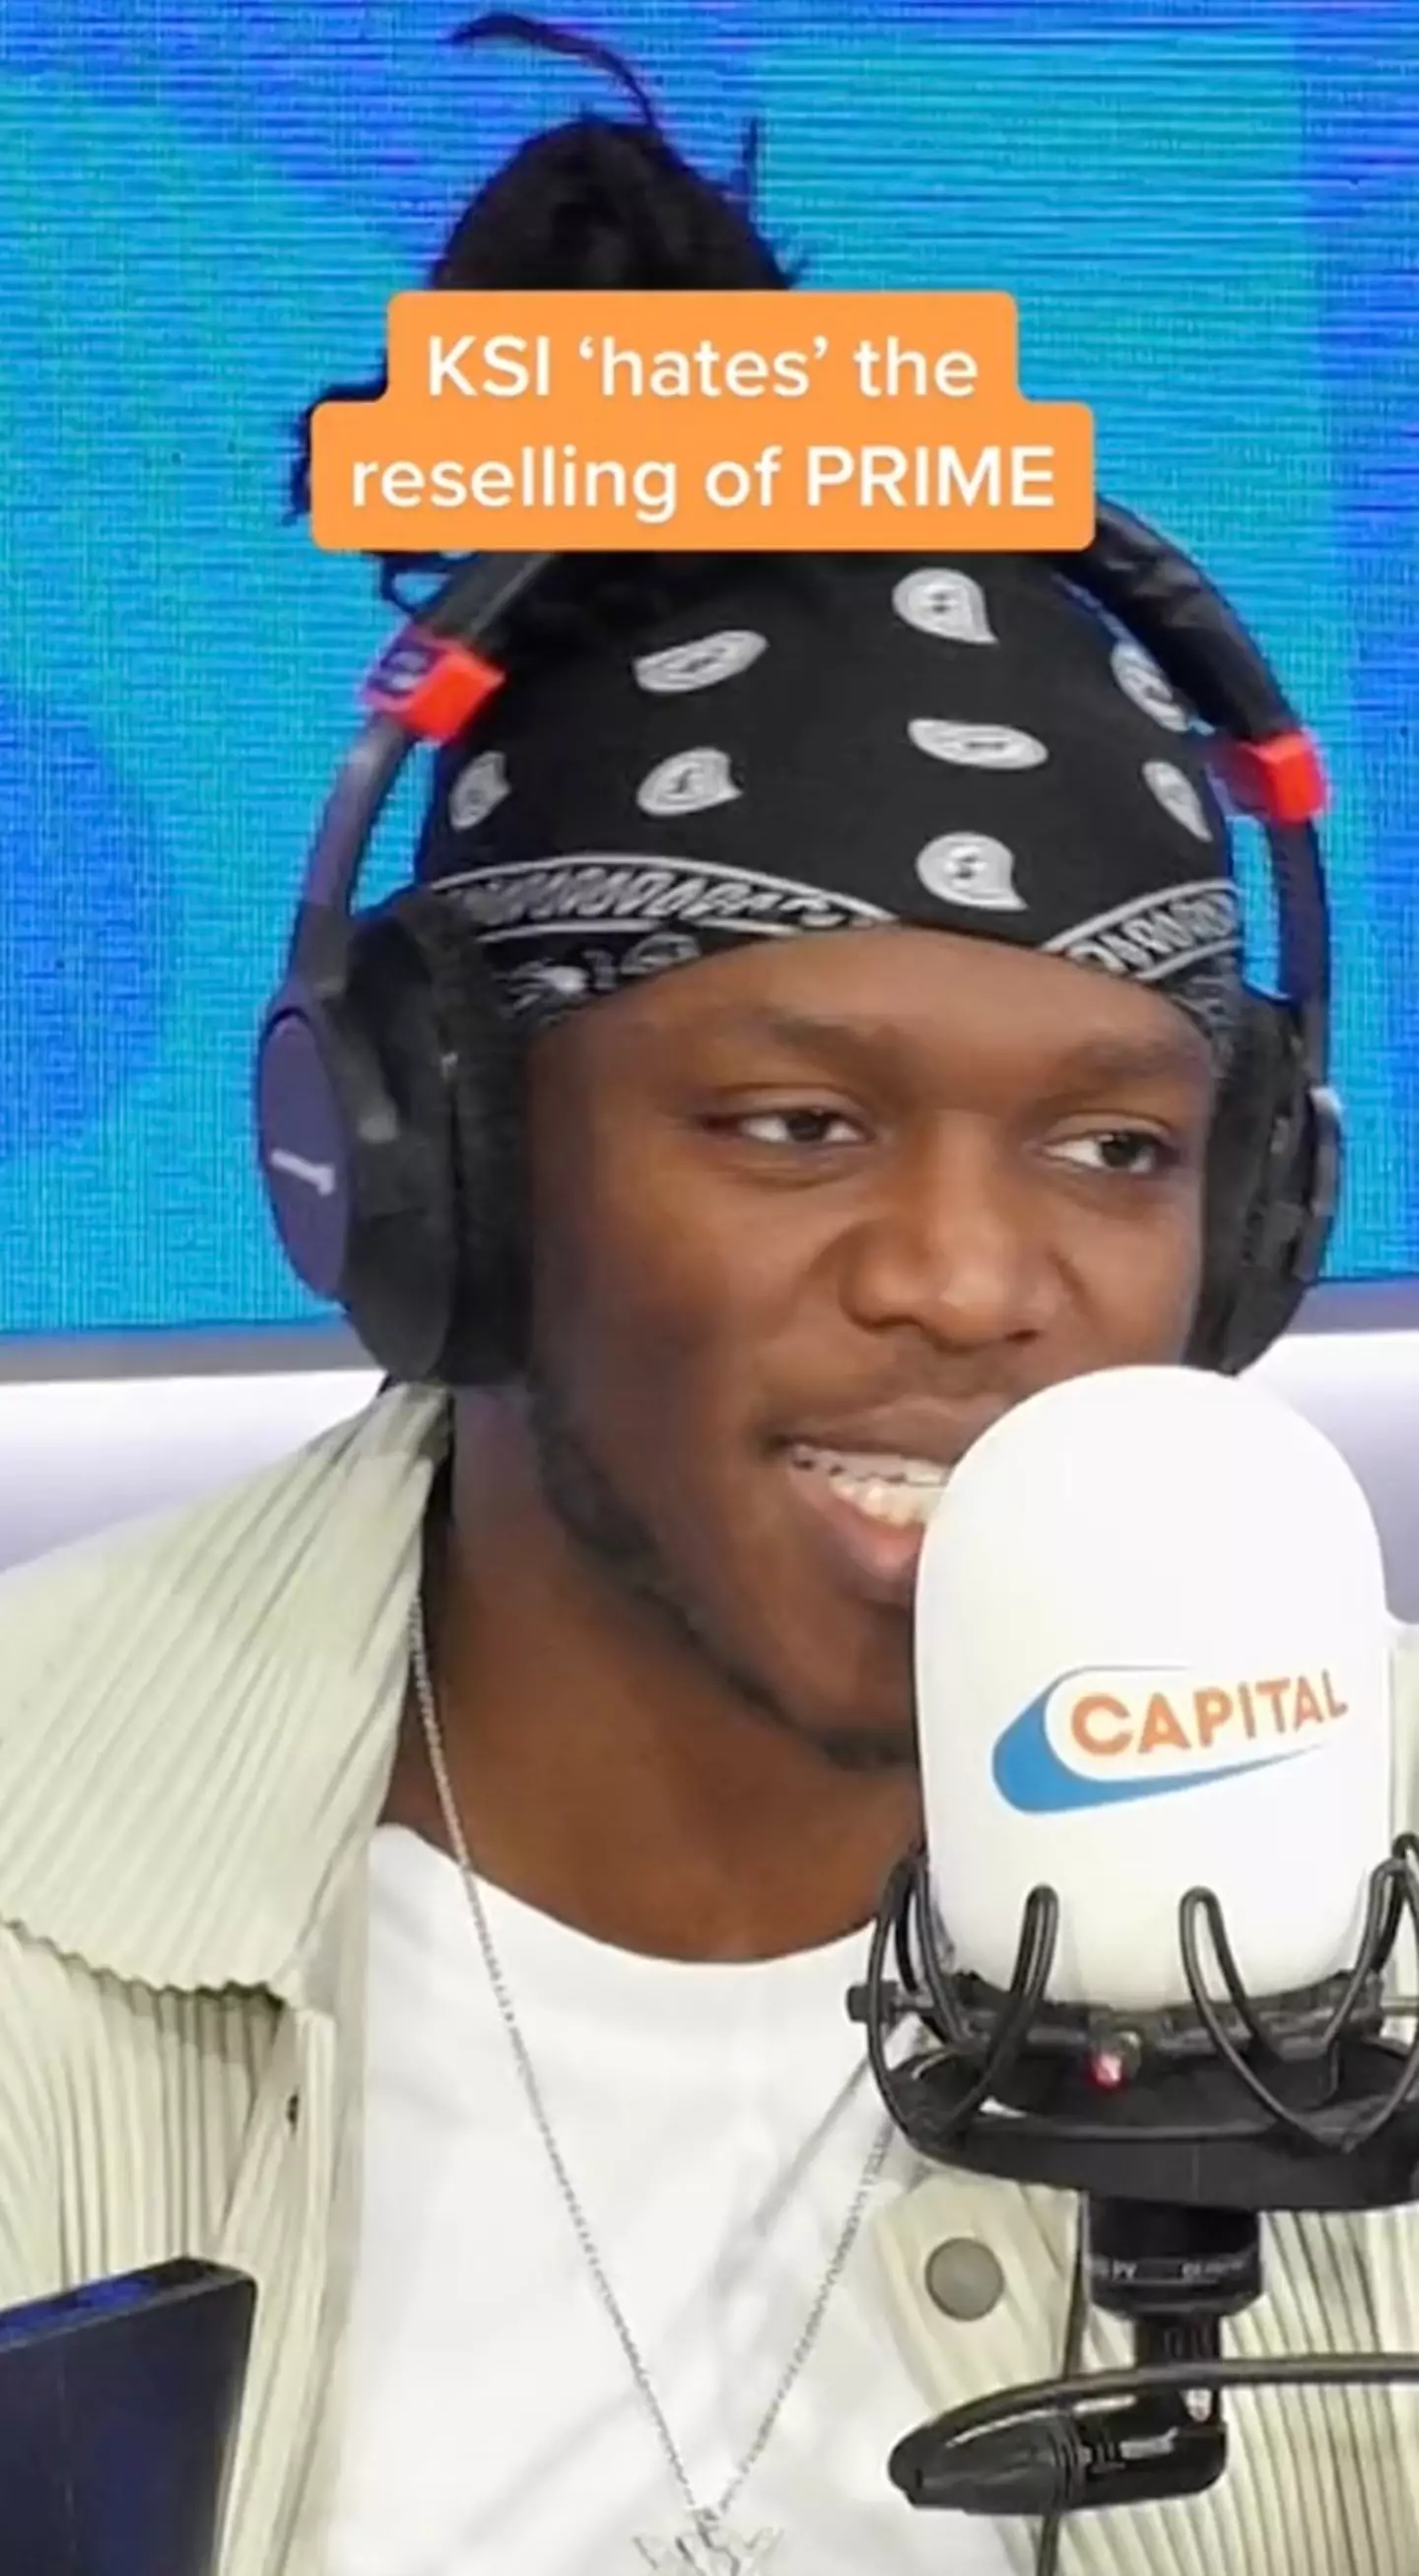 KSI 'hates' when people resell Prime for inflated prices.